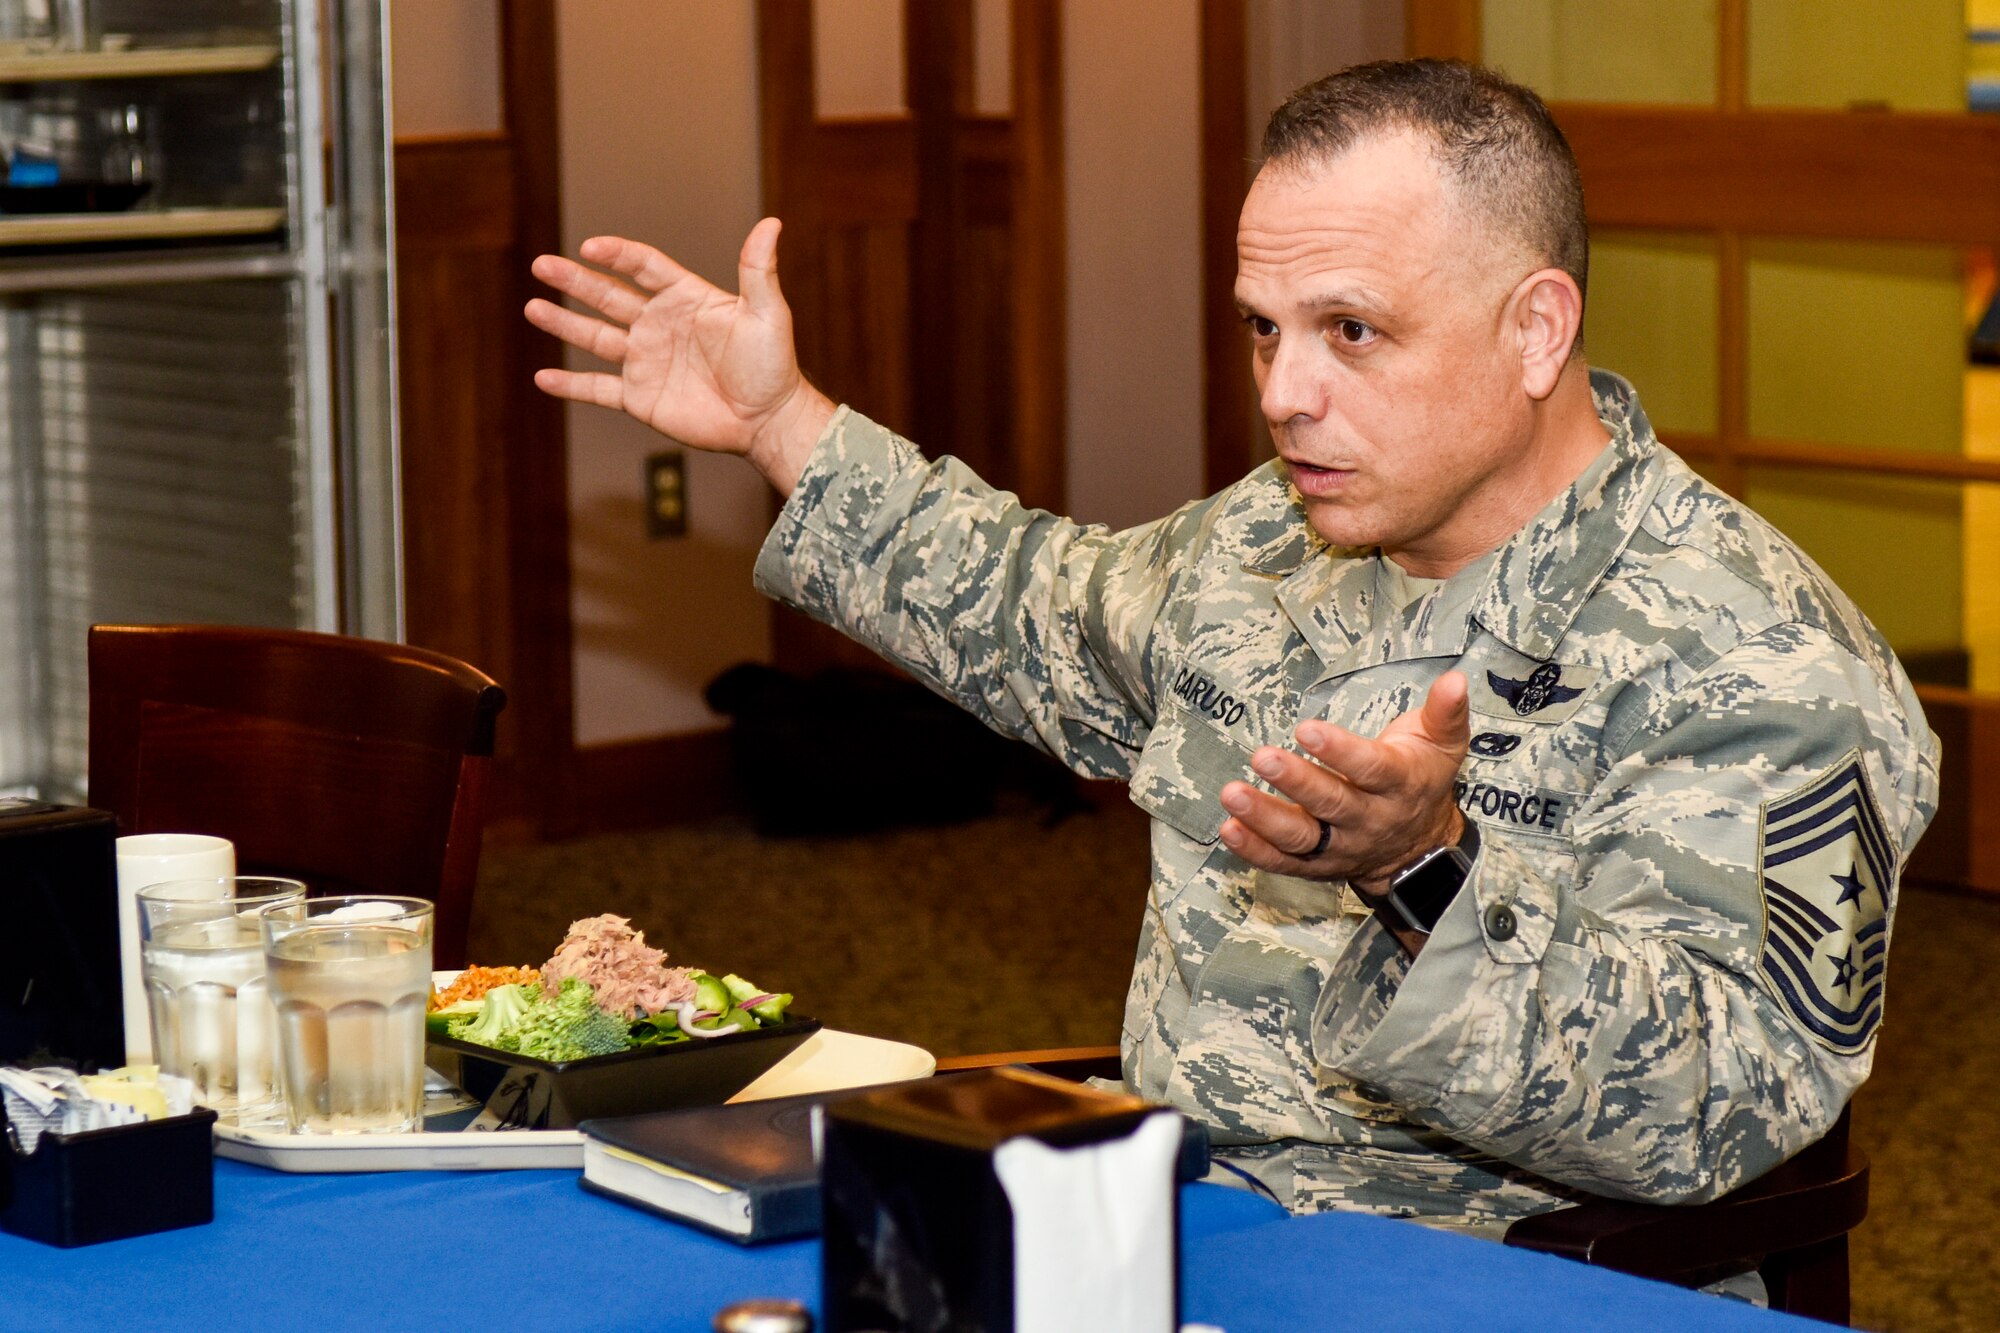 Chief Master Sgt. Matthew Caruso, command senior enlisted leader of U.S. Transportation Command, speaks at a chiefs luncheon at the dining facility, Feb. 15, 2018, at Seymour Johnson Air Force Base, North Carolina.